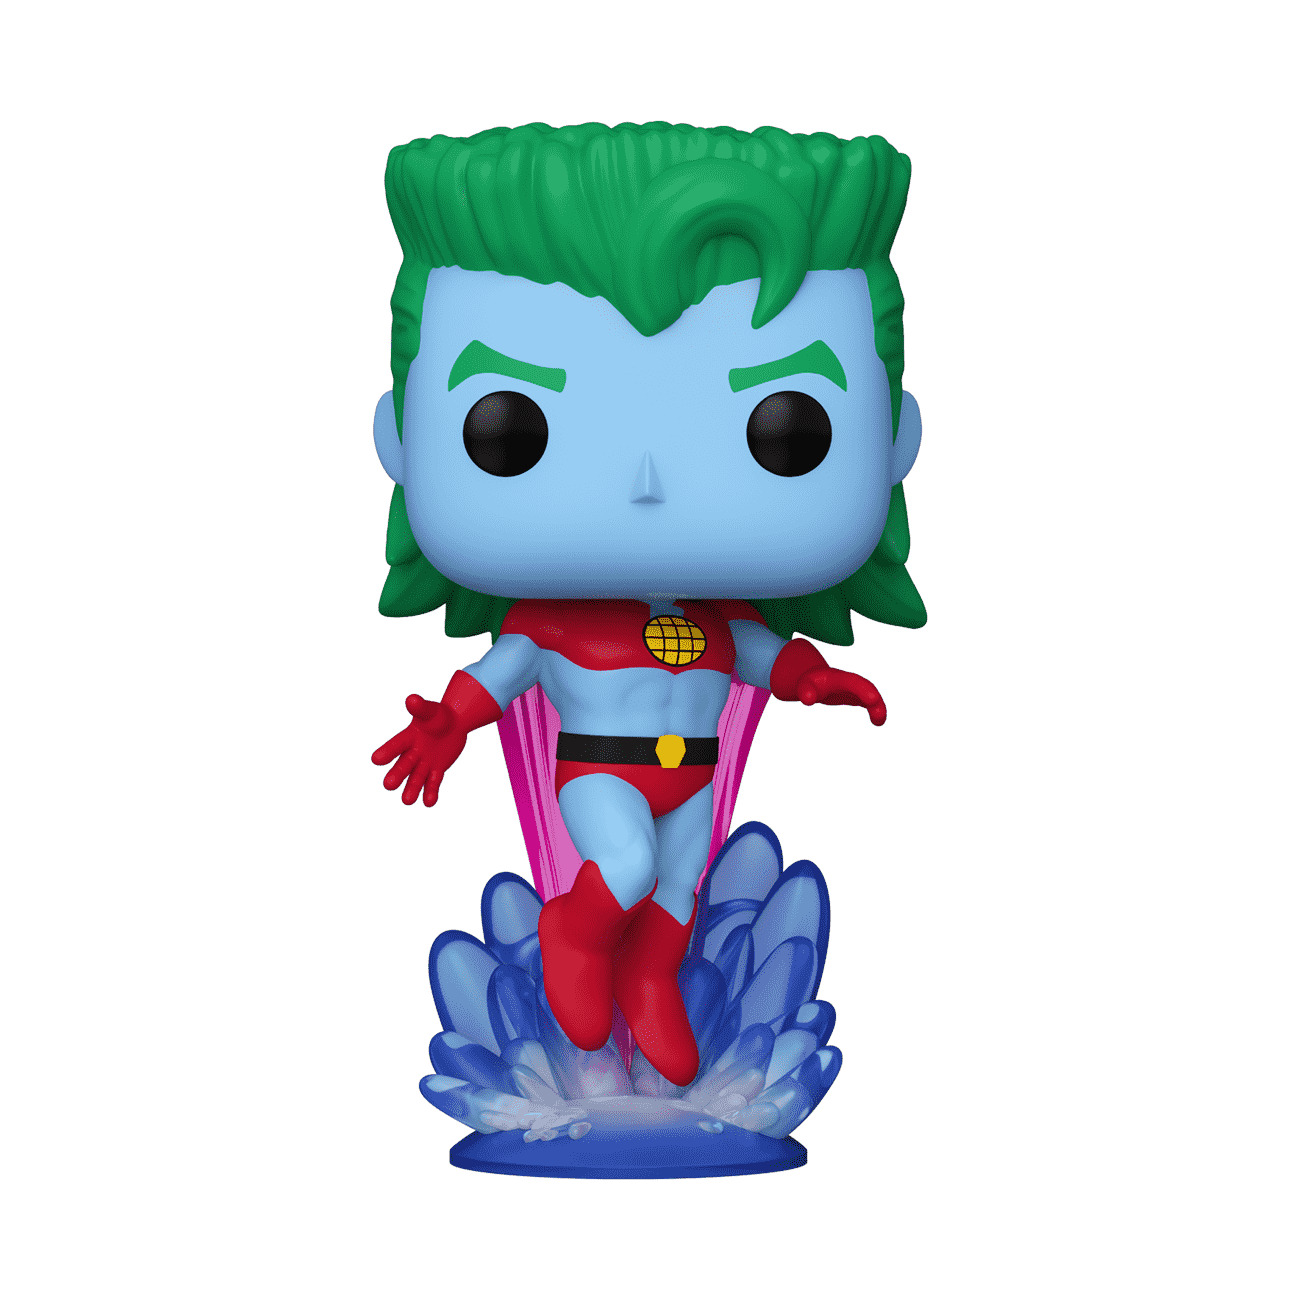 Funko Pop Captain Planet (Flying) The New Adventures of Captain Planet